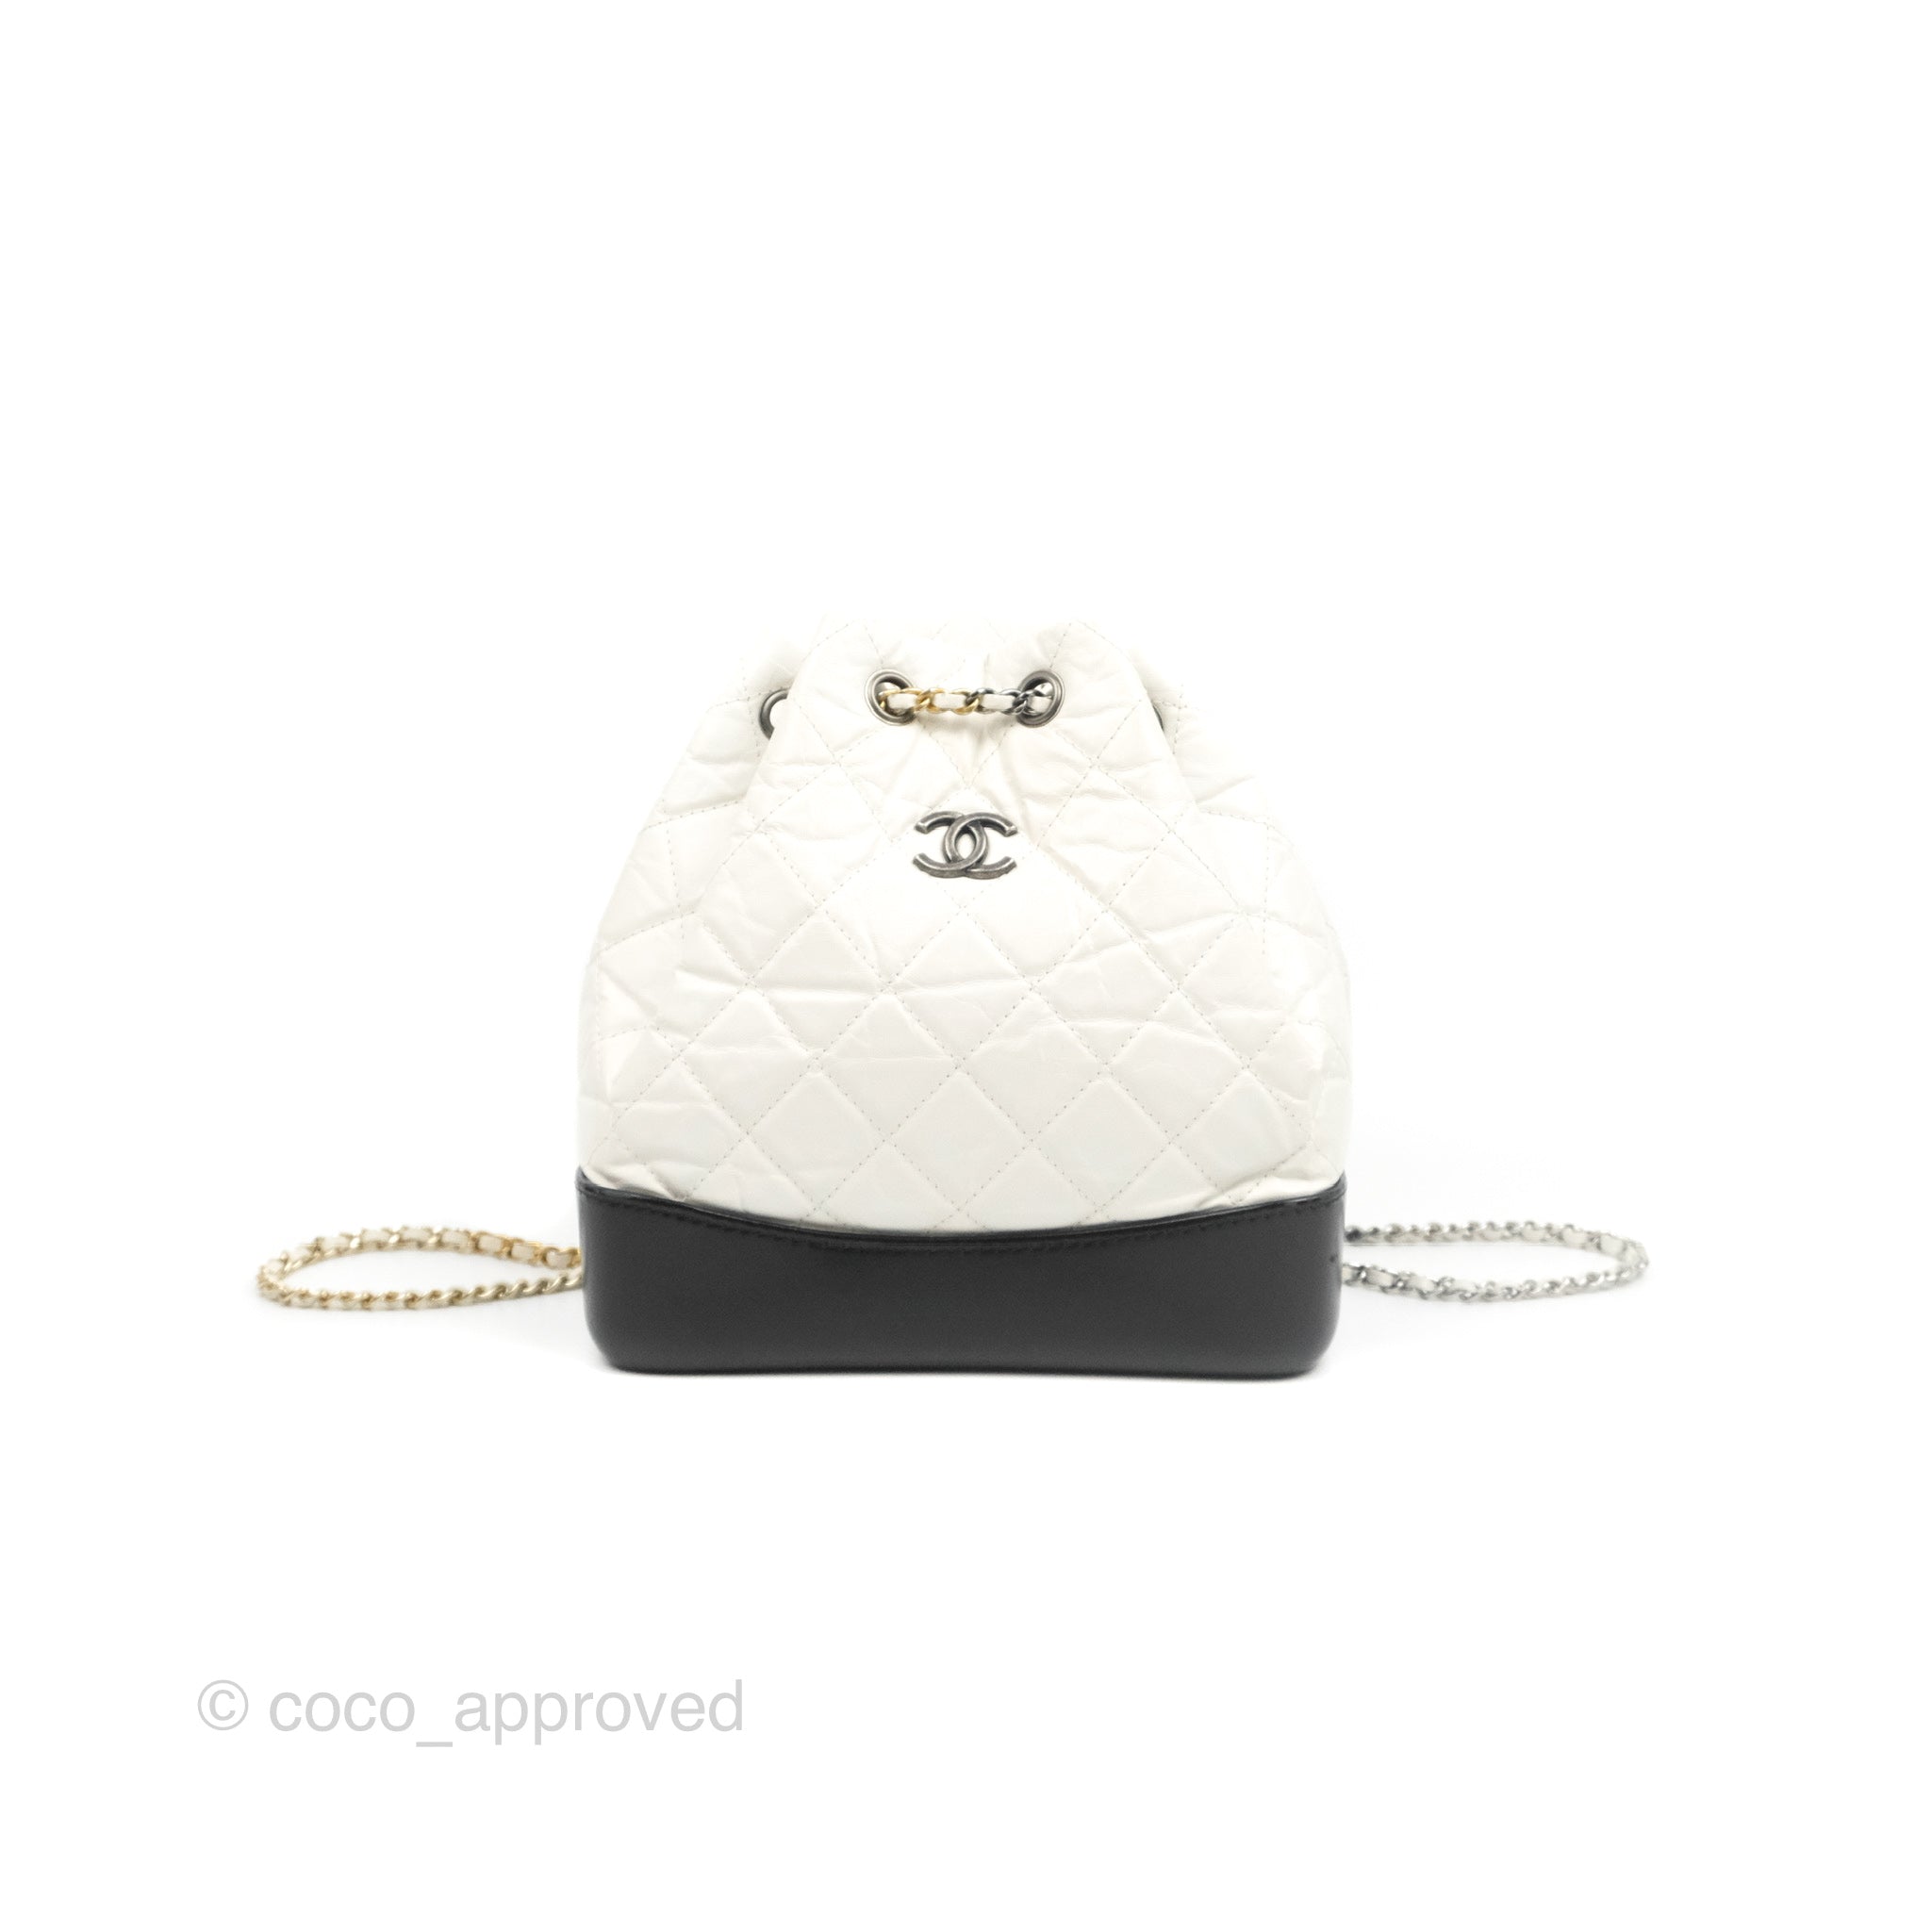 Chanel Black/White Quilted Leather Small Gabrielle Bucket Bag Chanel